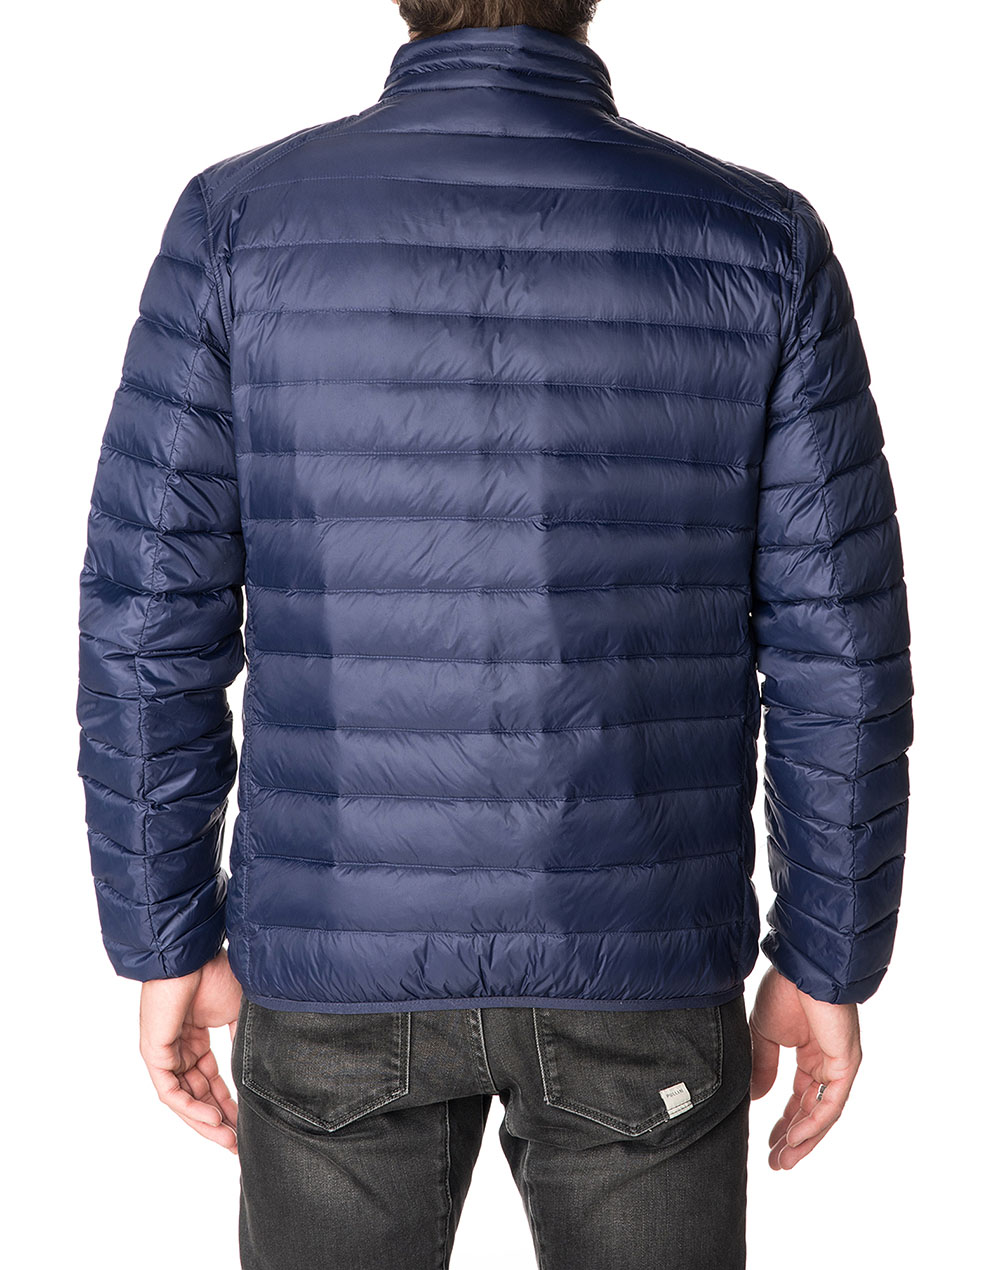 Men's feather jacket withoud hood DAILLE